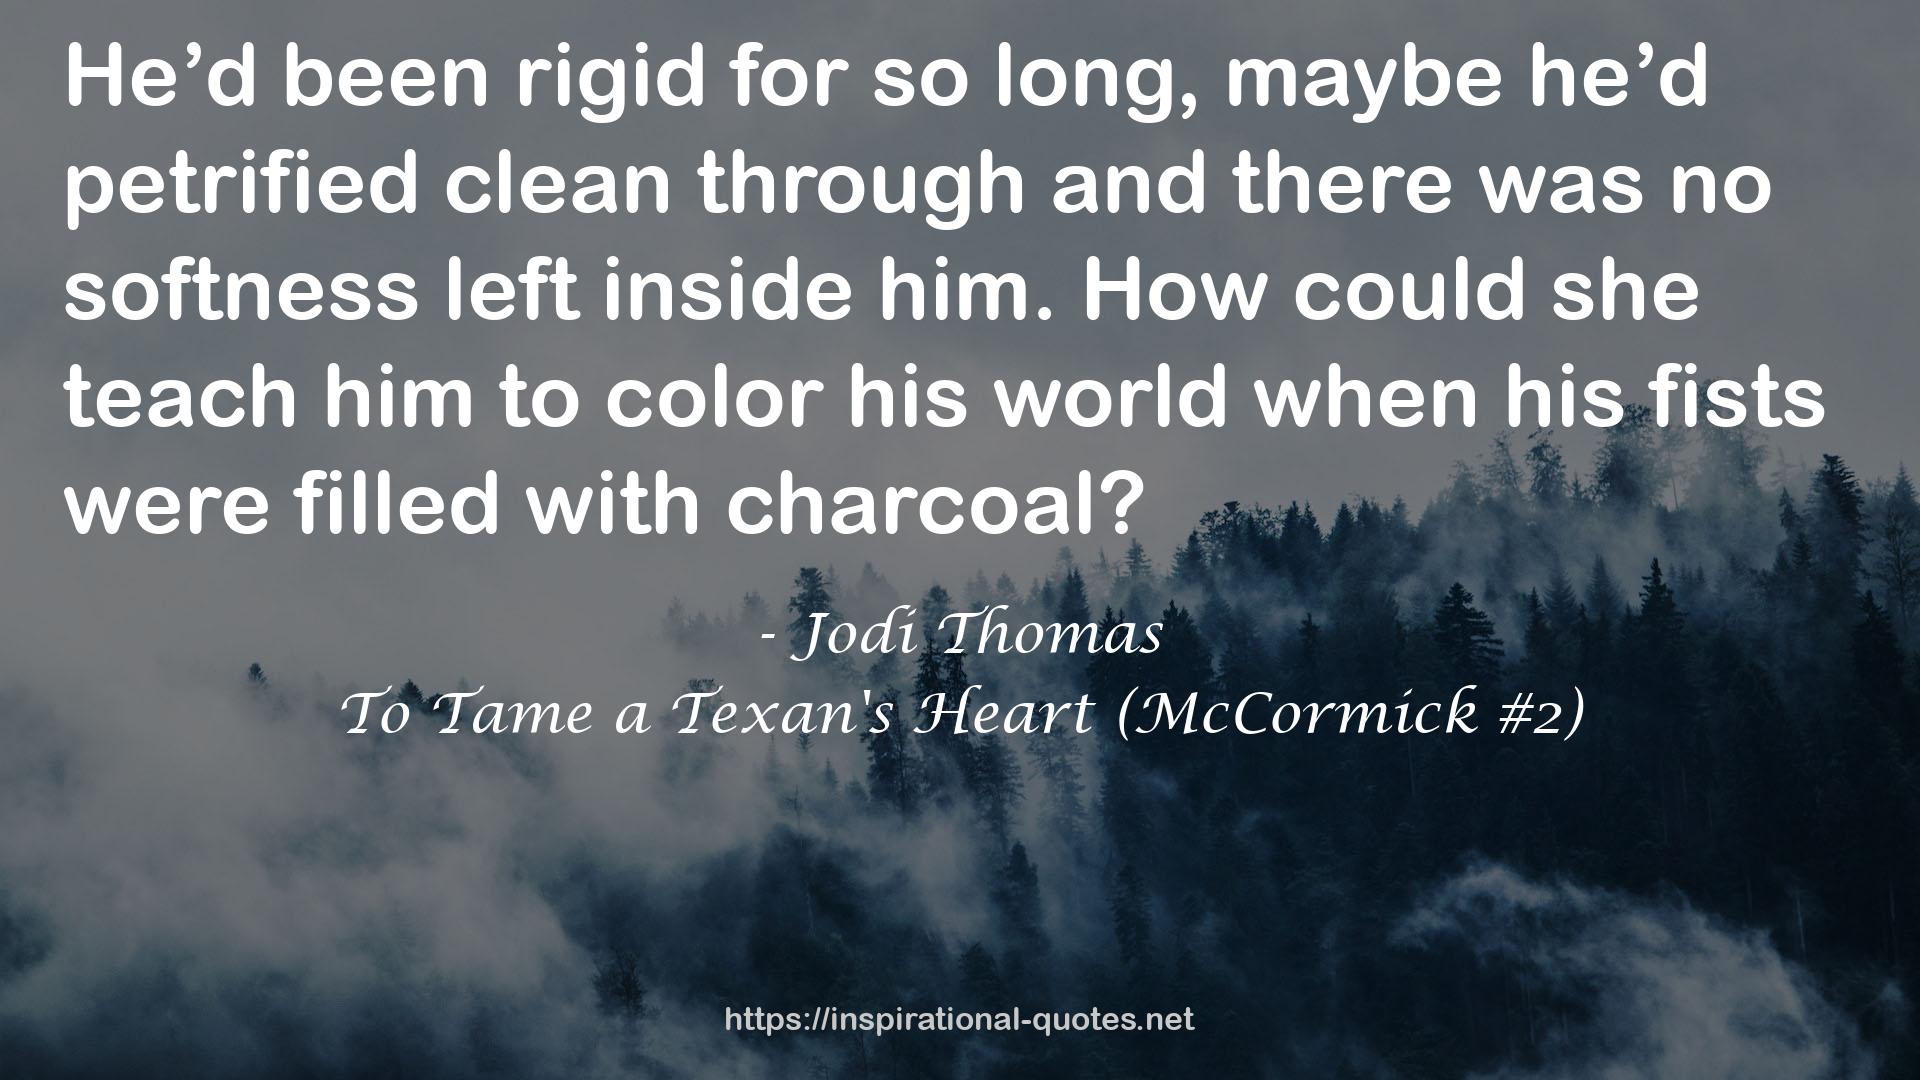 To Tame a Texan's Heart (McCormick #2) QUOTES